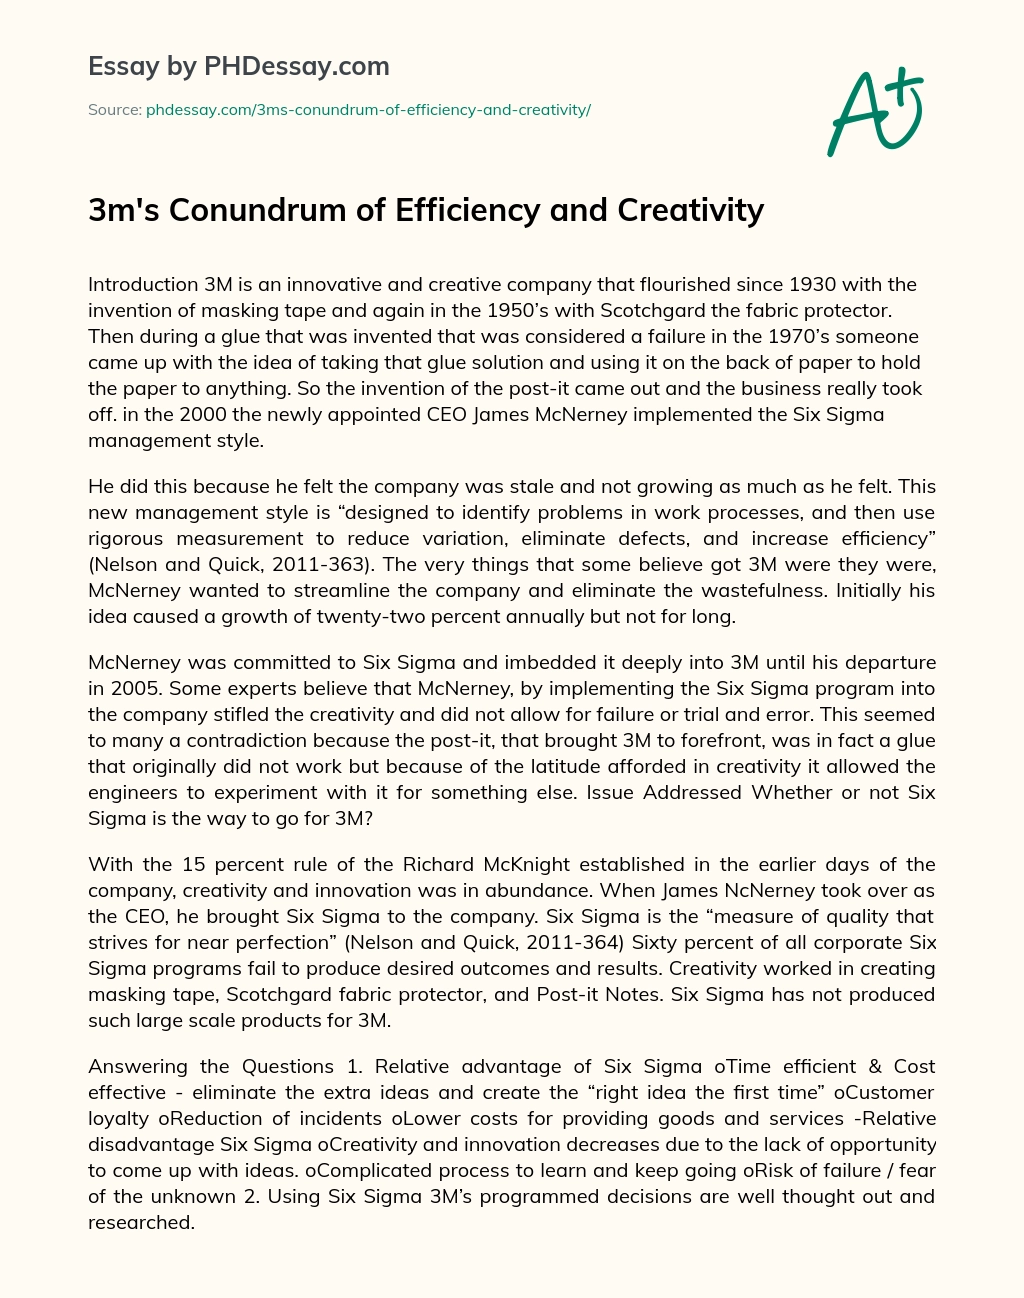 3m’s Conundrum of Efficiency and Creativity essay